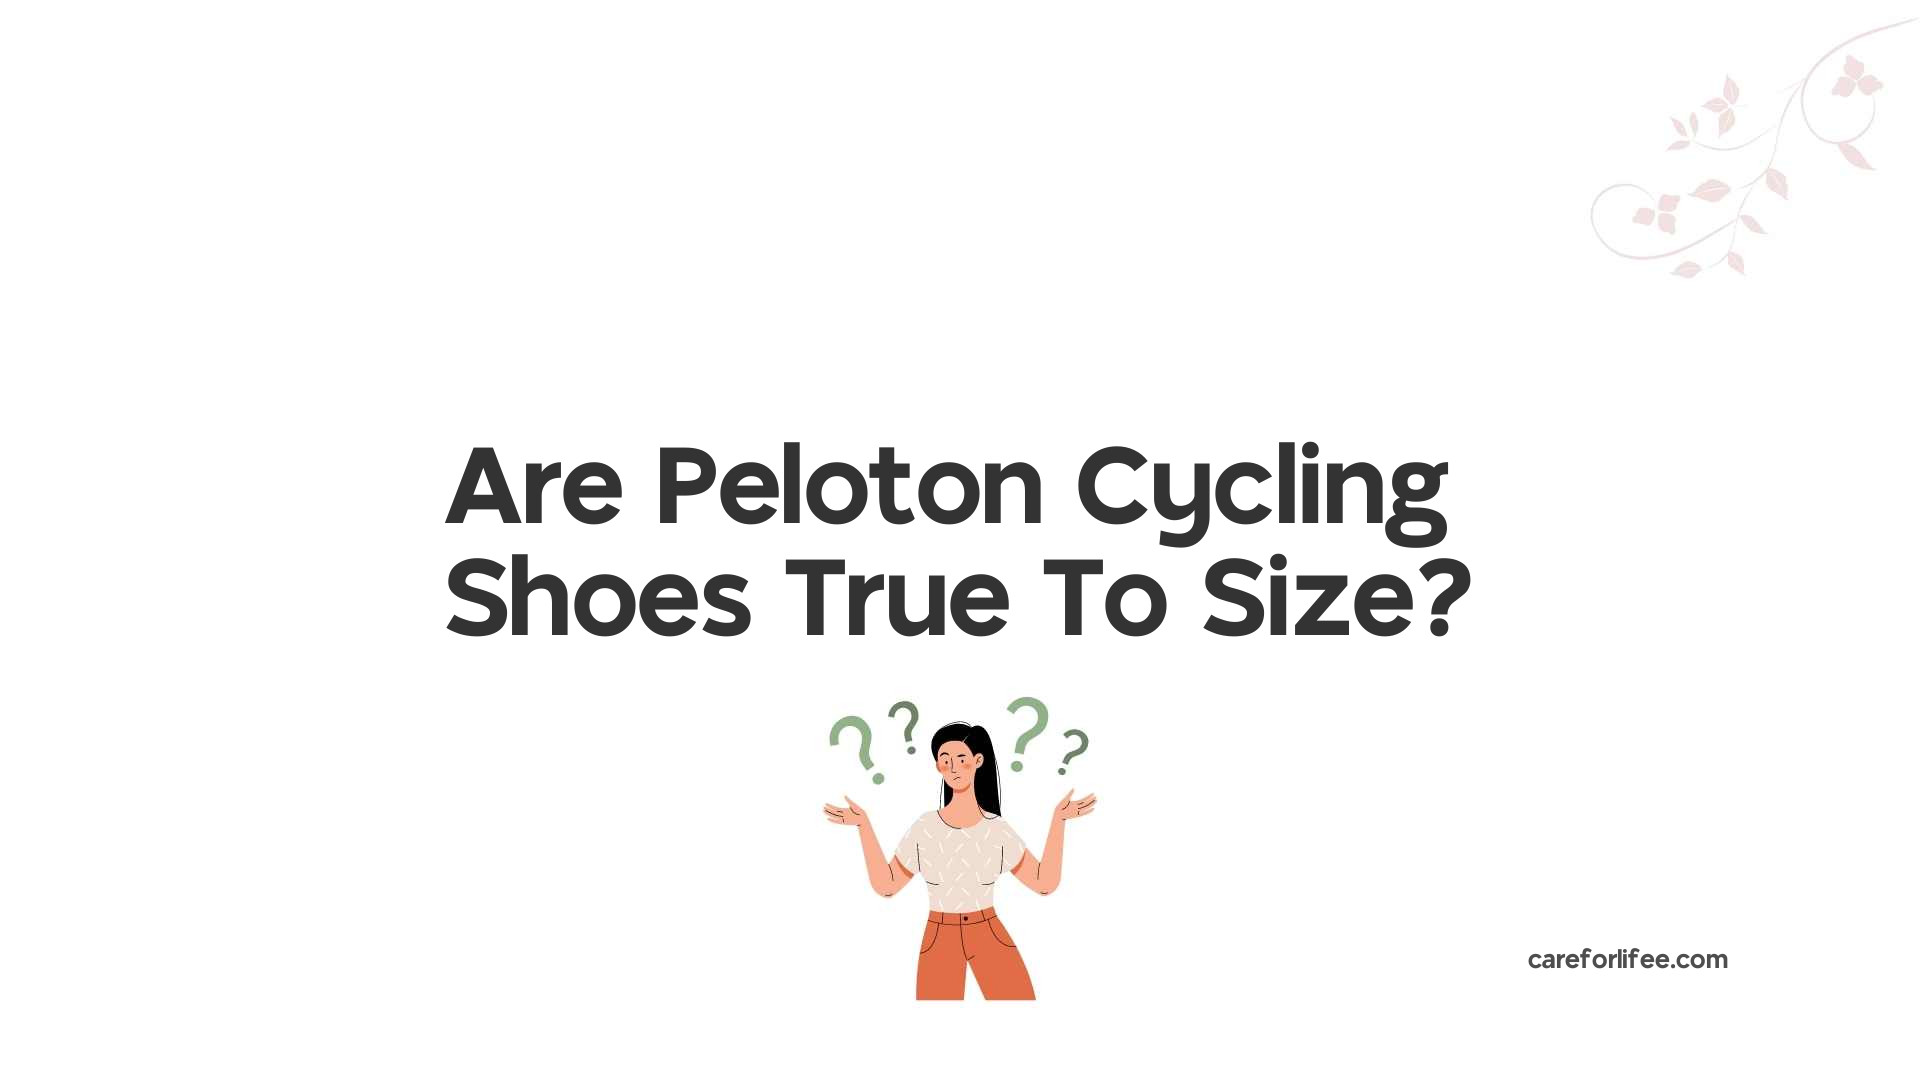 Are Peloton Cycling Shoes True To Size?